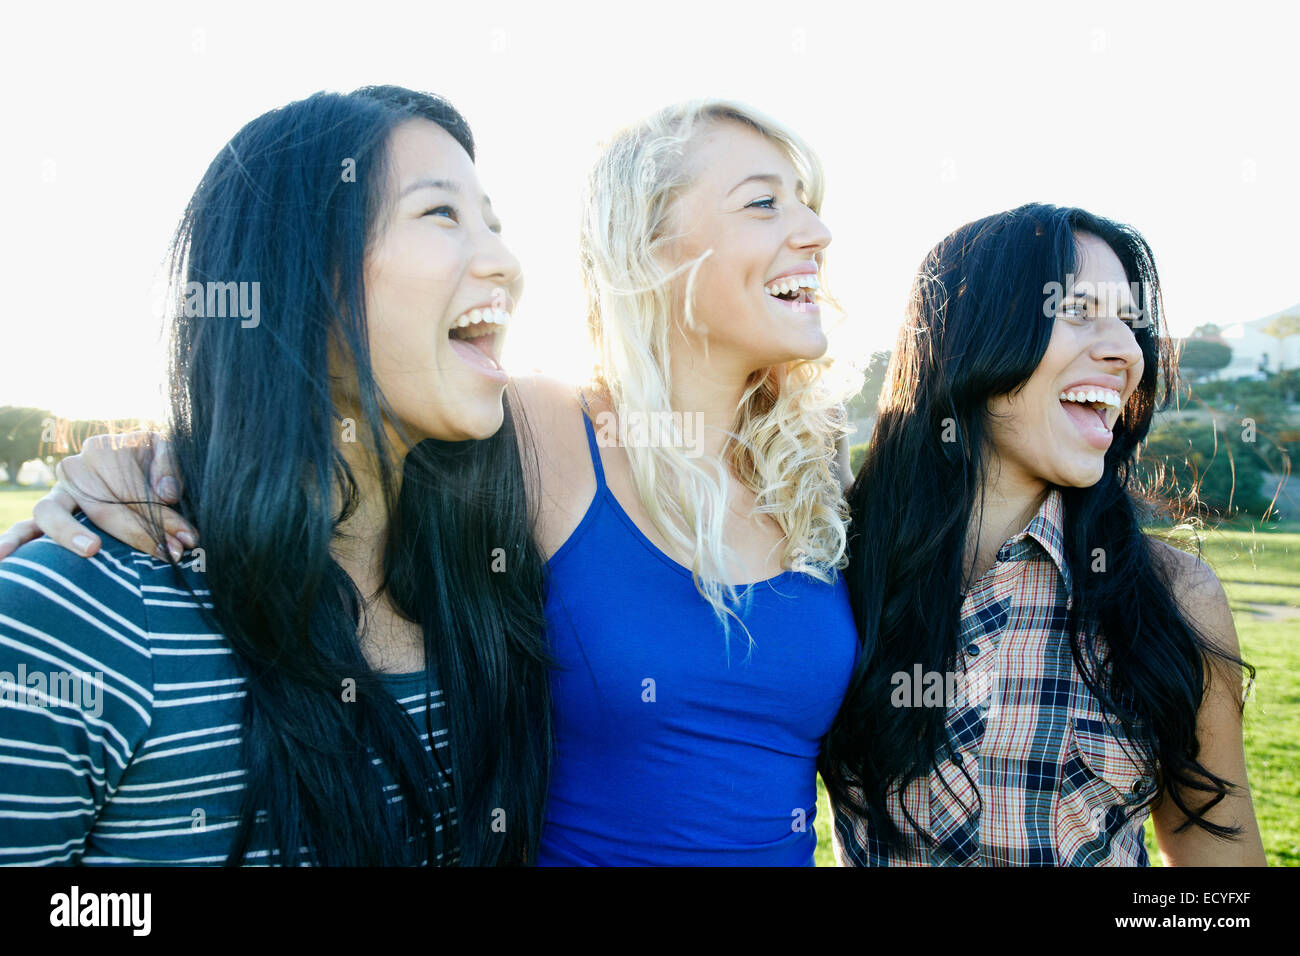 Women laughing outdoors Stock Photo